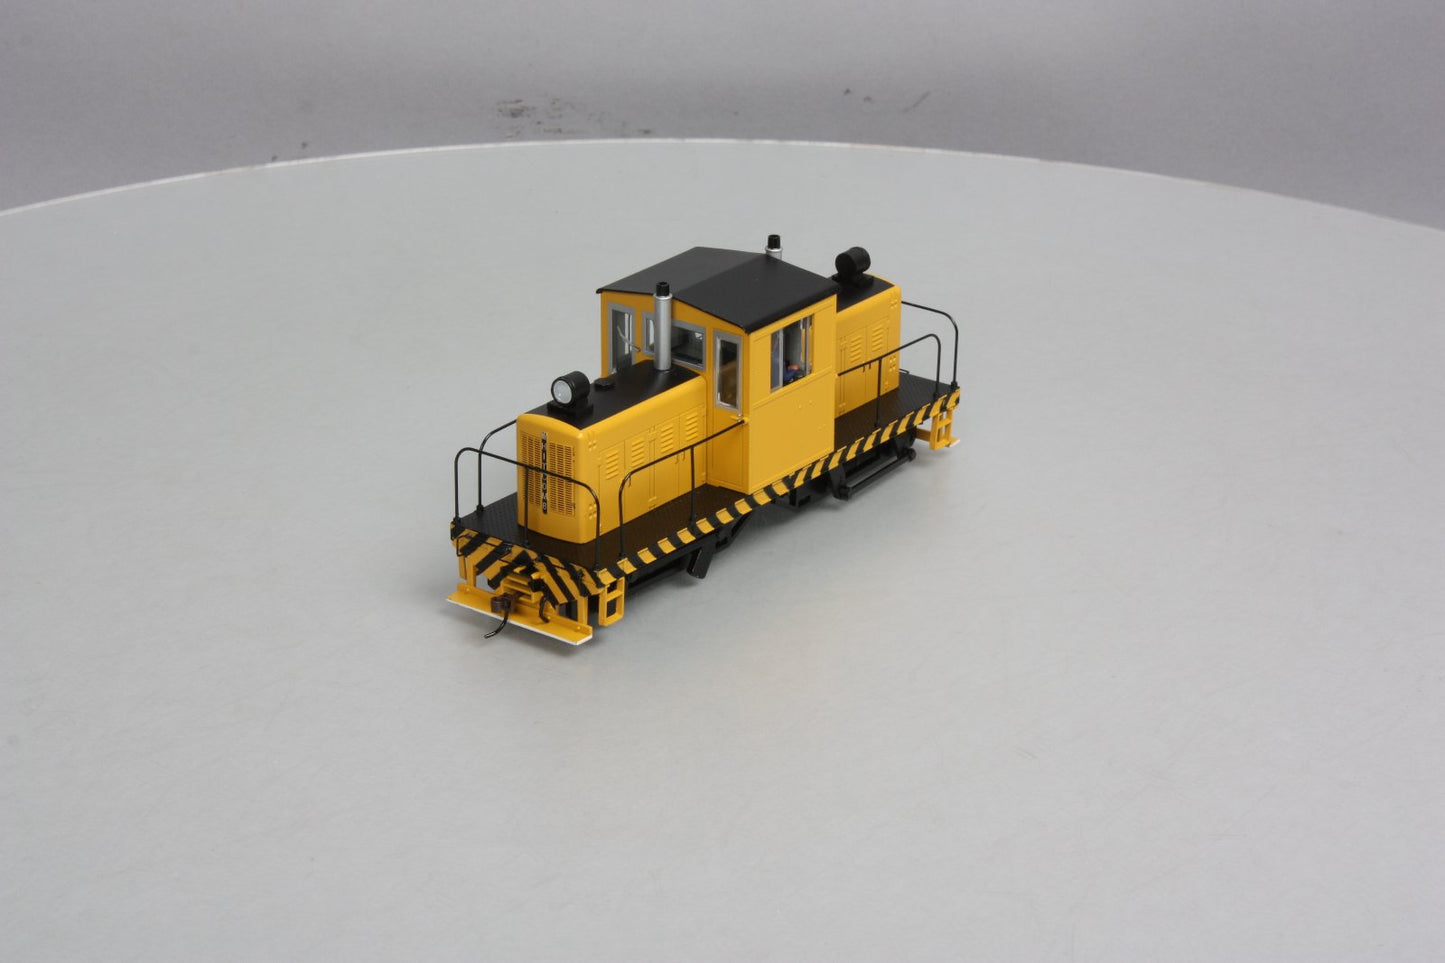 Bachmann 29203 On30 Unlettered Whitcomb 50-Ton Center-Cab Diesel Locomotive